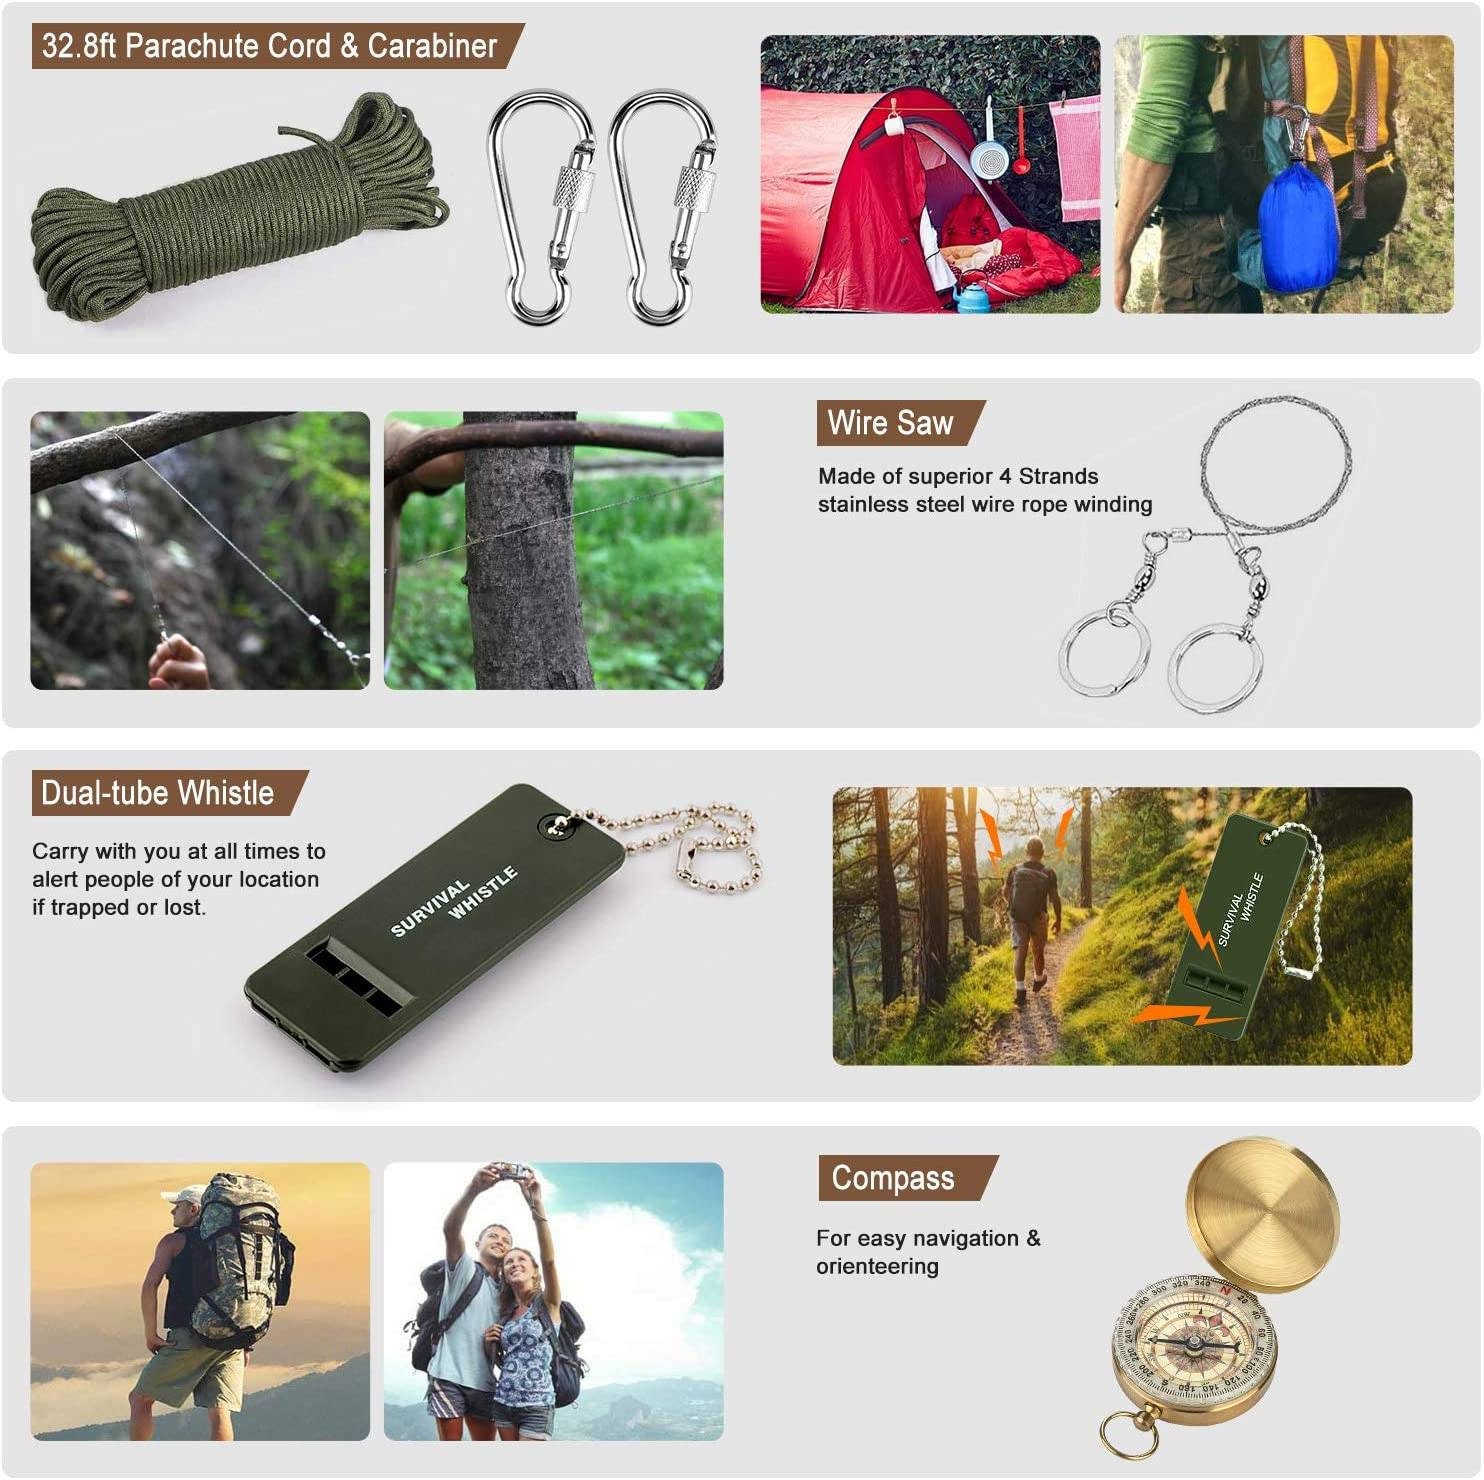 All in One Emergency Survival Kit for Camping, Hunting, Hiking